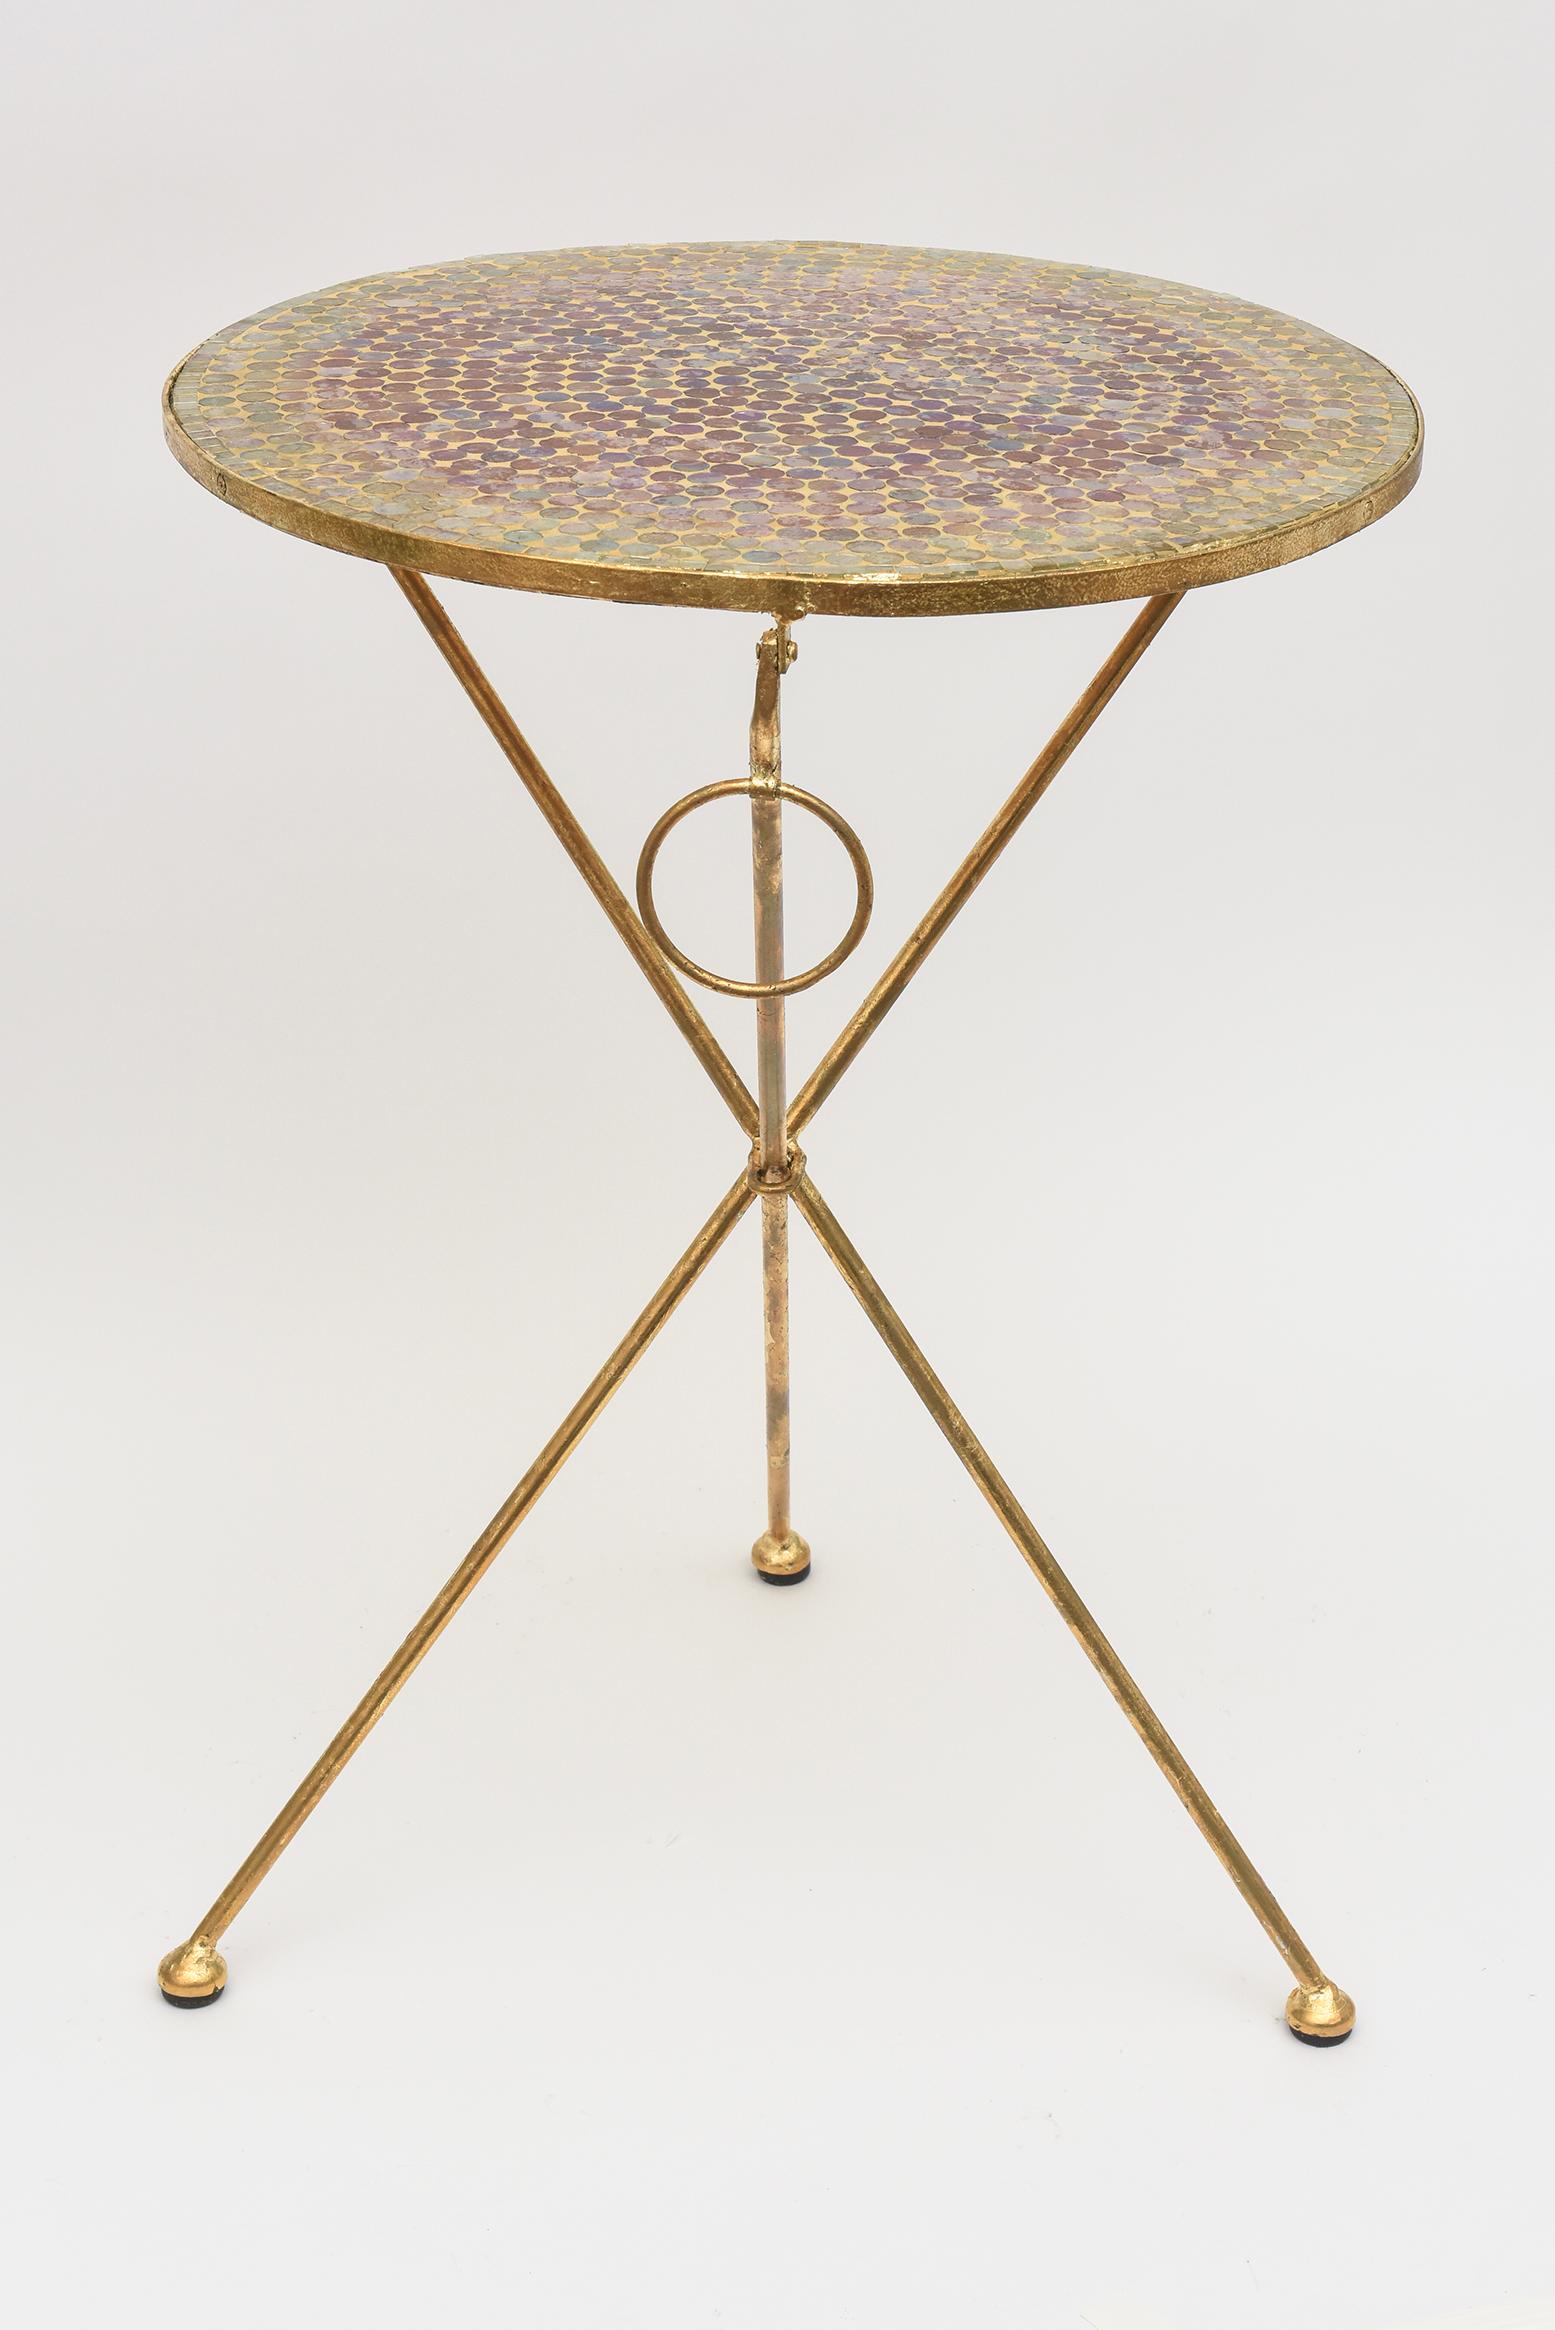 This amazing vintage 1960's tripod side or end table is American.  It has a beautiful glass mosaic top that has iridescent colors of circular glass in shades of the subtle colors of  light green,  orange, light pink, purple, yellow, blue and etc.